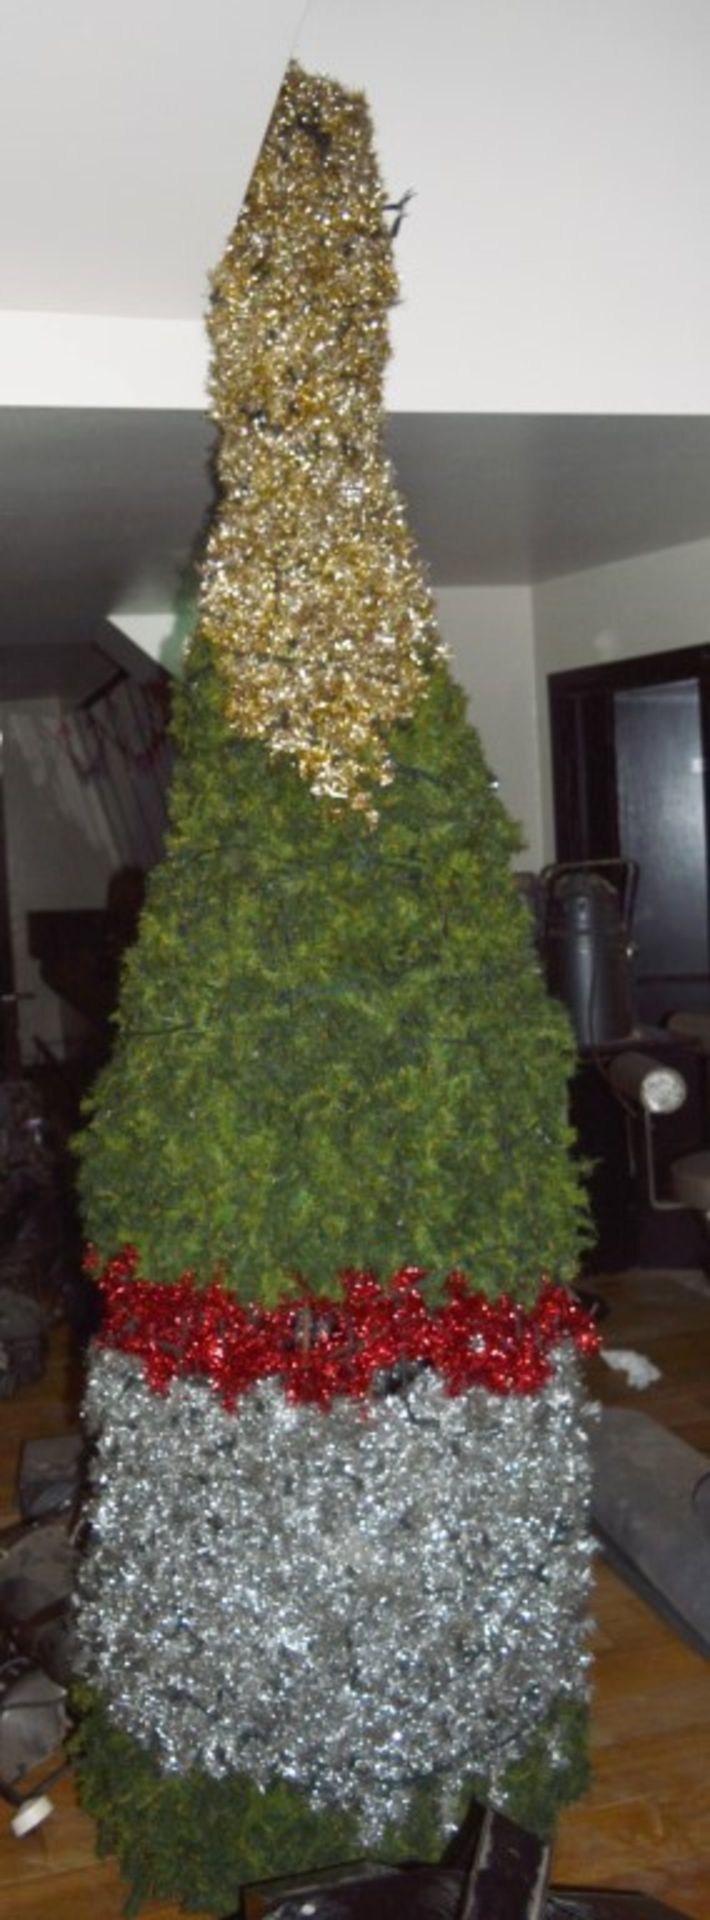 1 x Giant WINE BOTTLE Shaped CHRISTMAS TREE - Stands Approx 9ft Tall - 80cm Diameter - HUGE SIZE - - Image 3 of 4